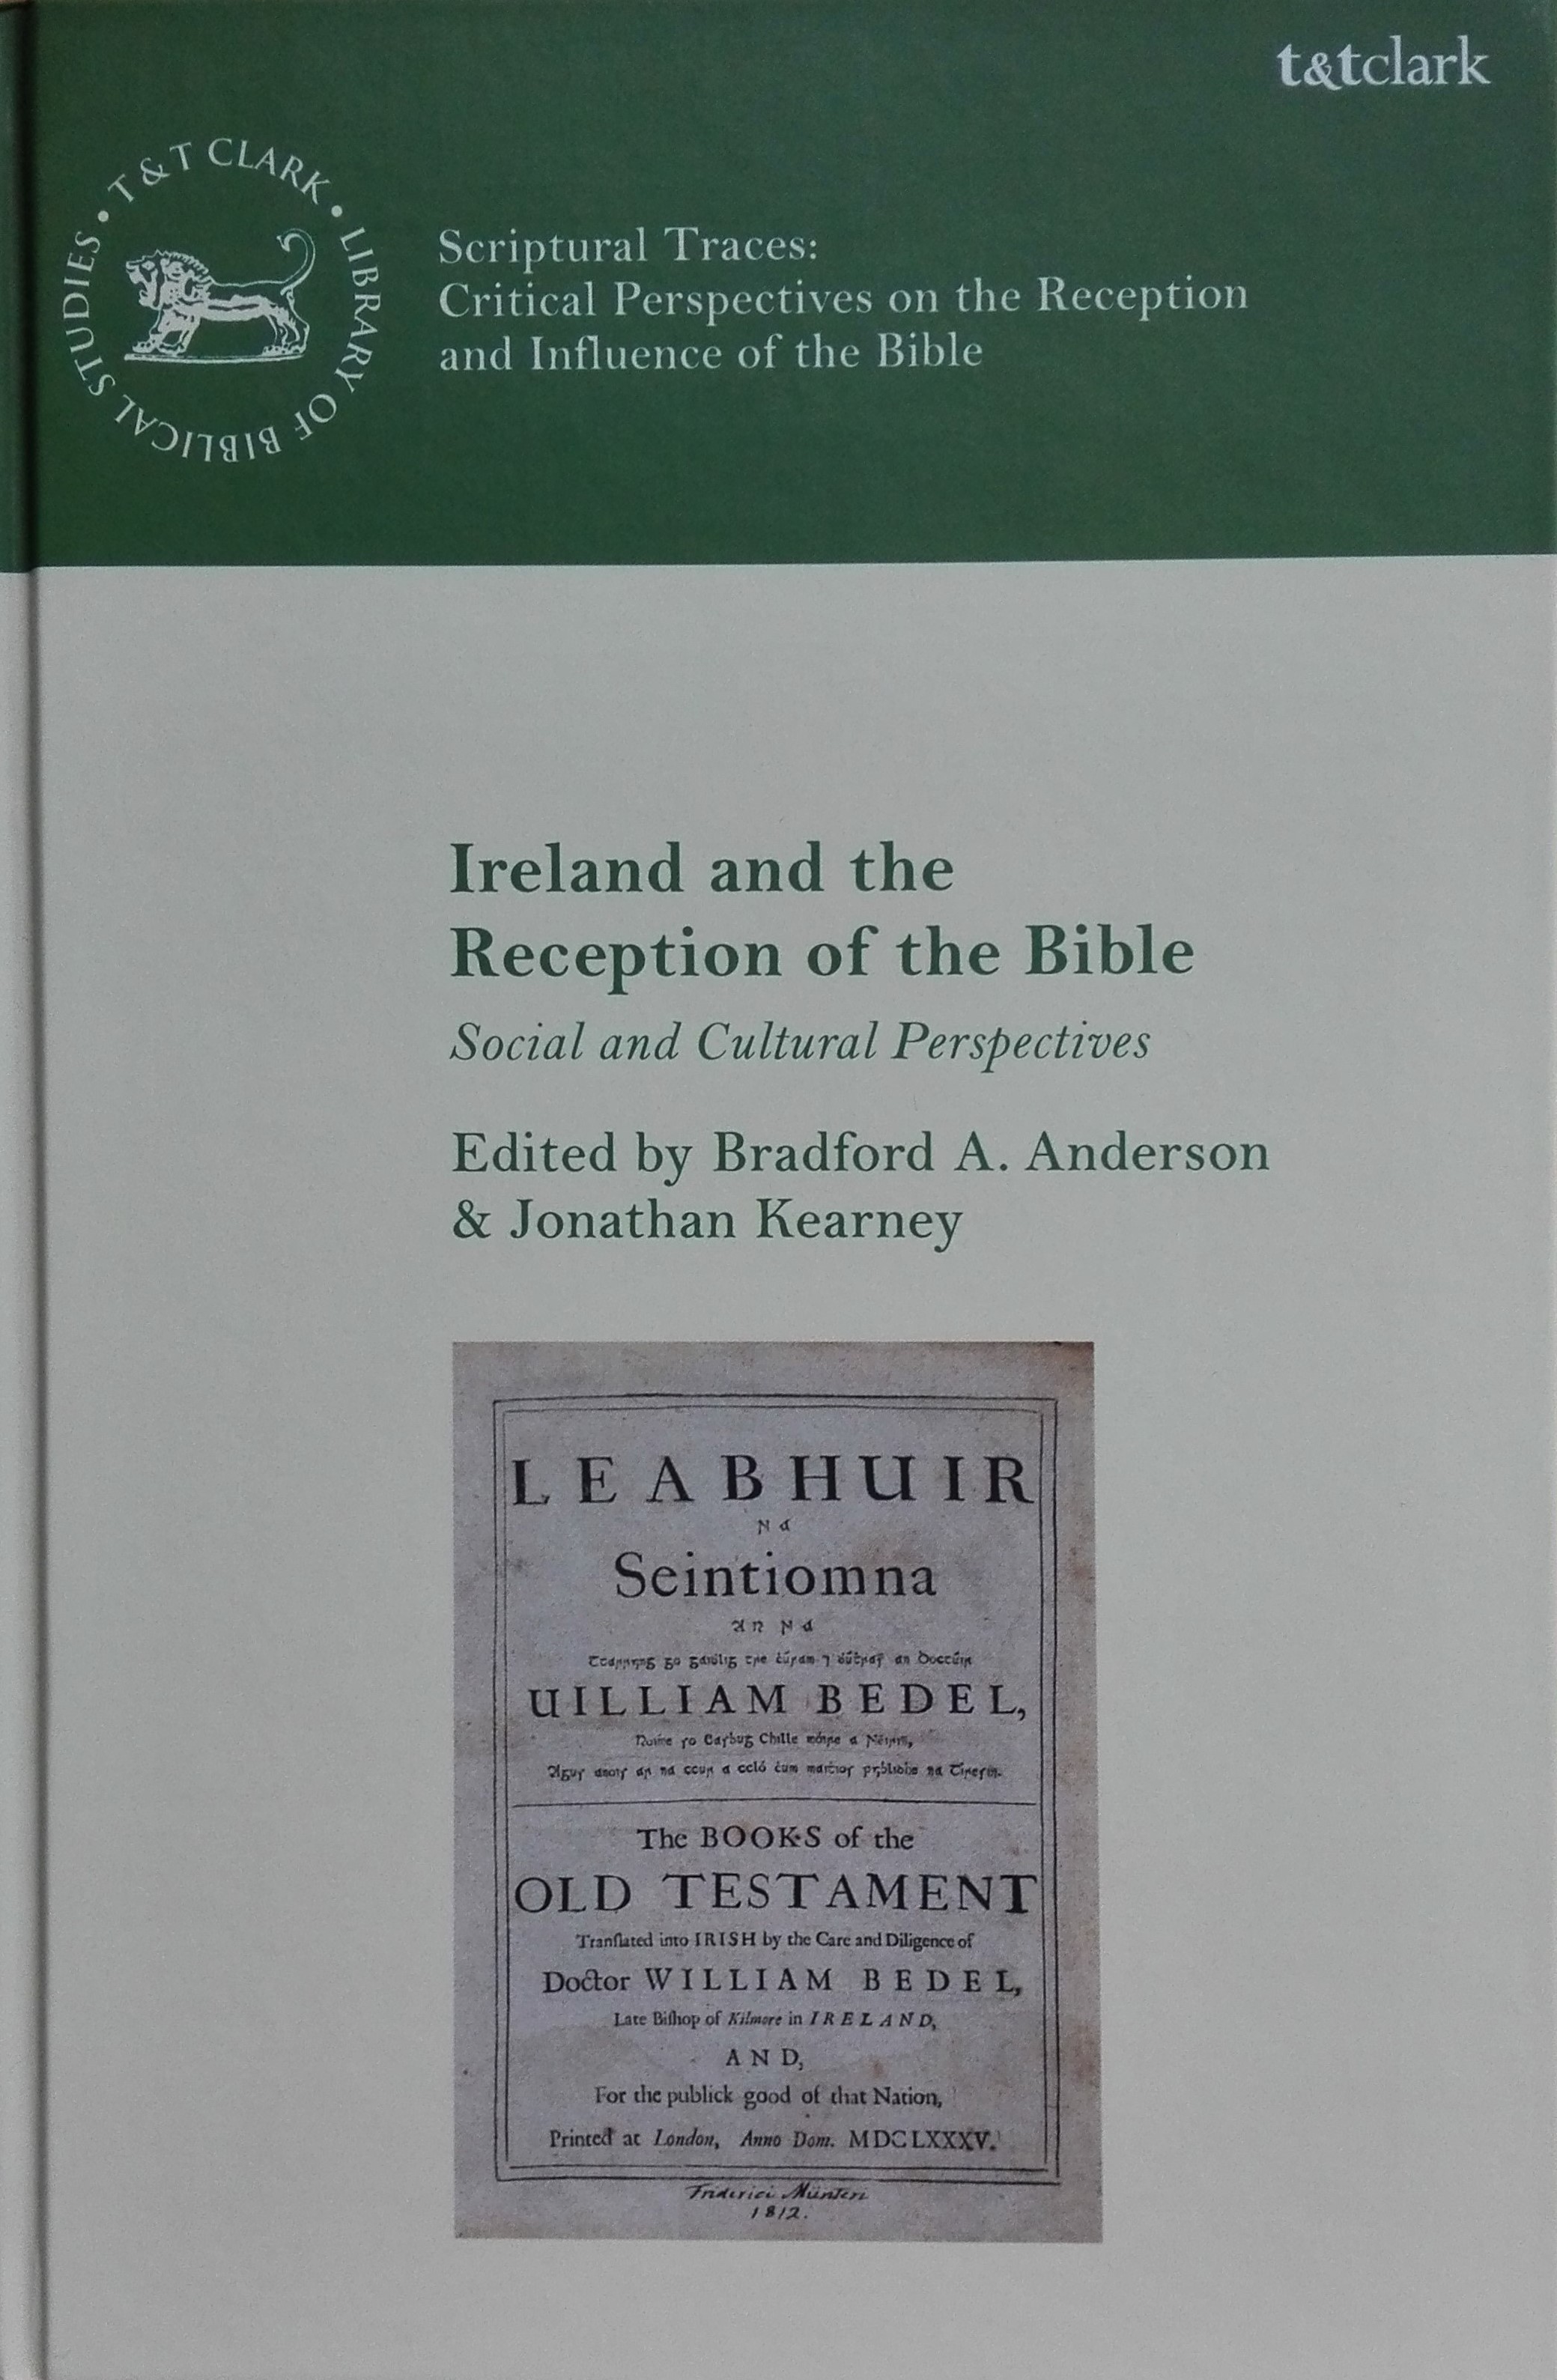 Reception of the Bible in Ireland